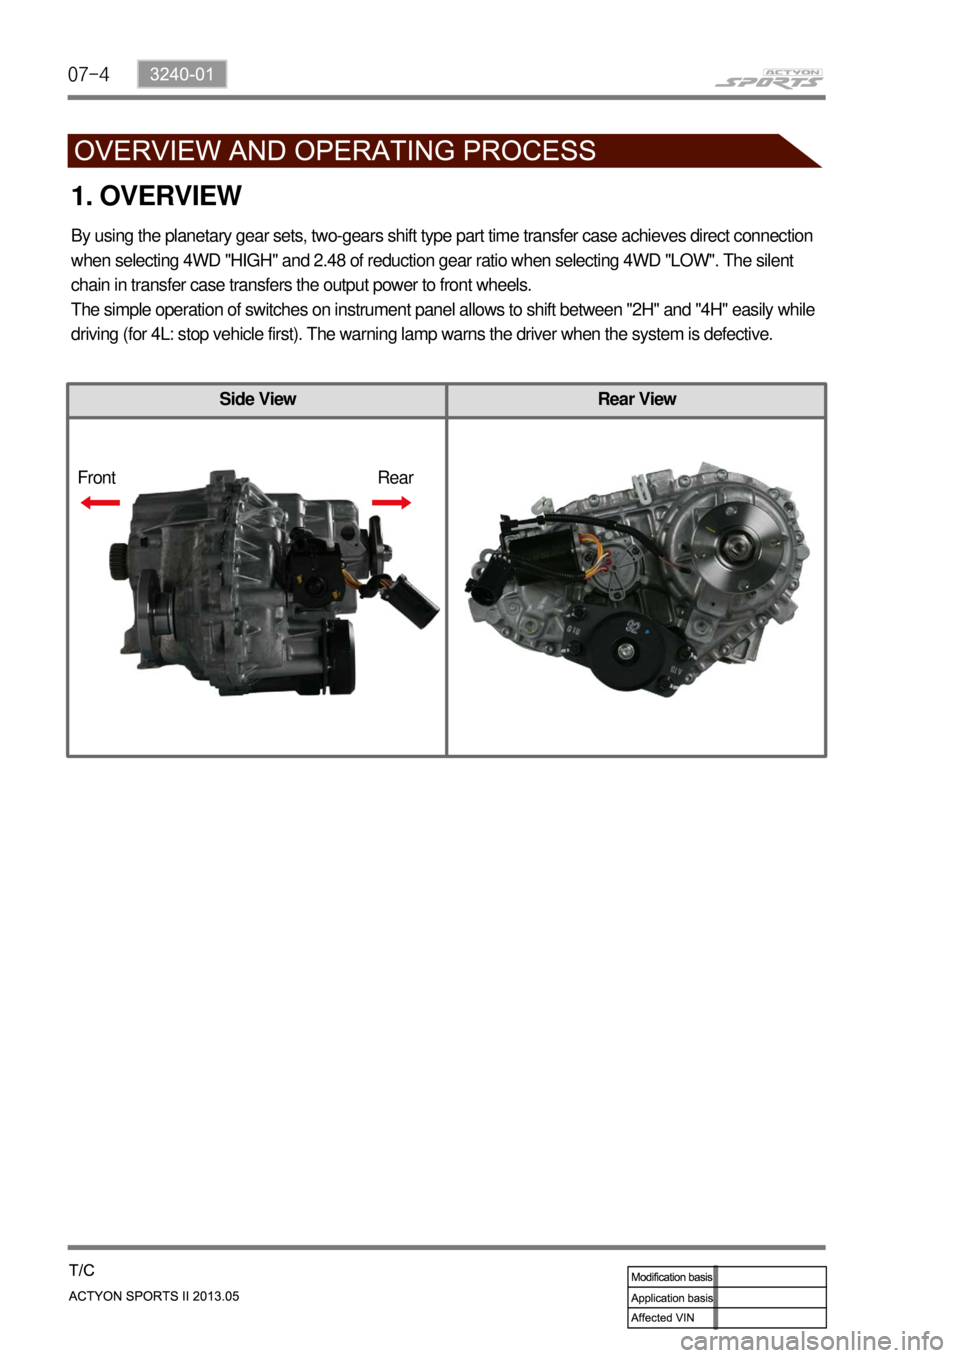 SSANGYONG NEW ACTYON SPORTS 2013  Service Manual 07-4
Side View Rear View
1. OVERVIEW
By using the planetary gear sets, two-gears shift type part time transfer case achieves direct connection 
when selecting 4WD "HIGH" and 2.48 of reduction gear rat